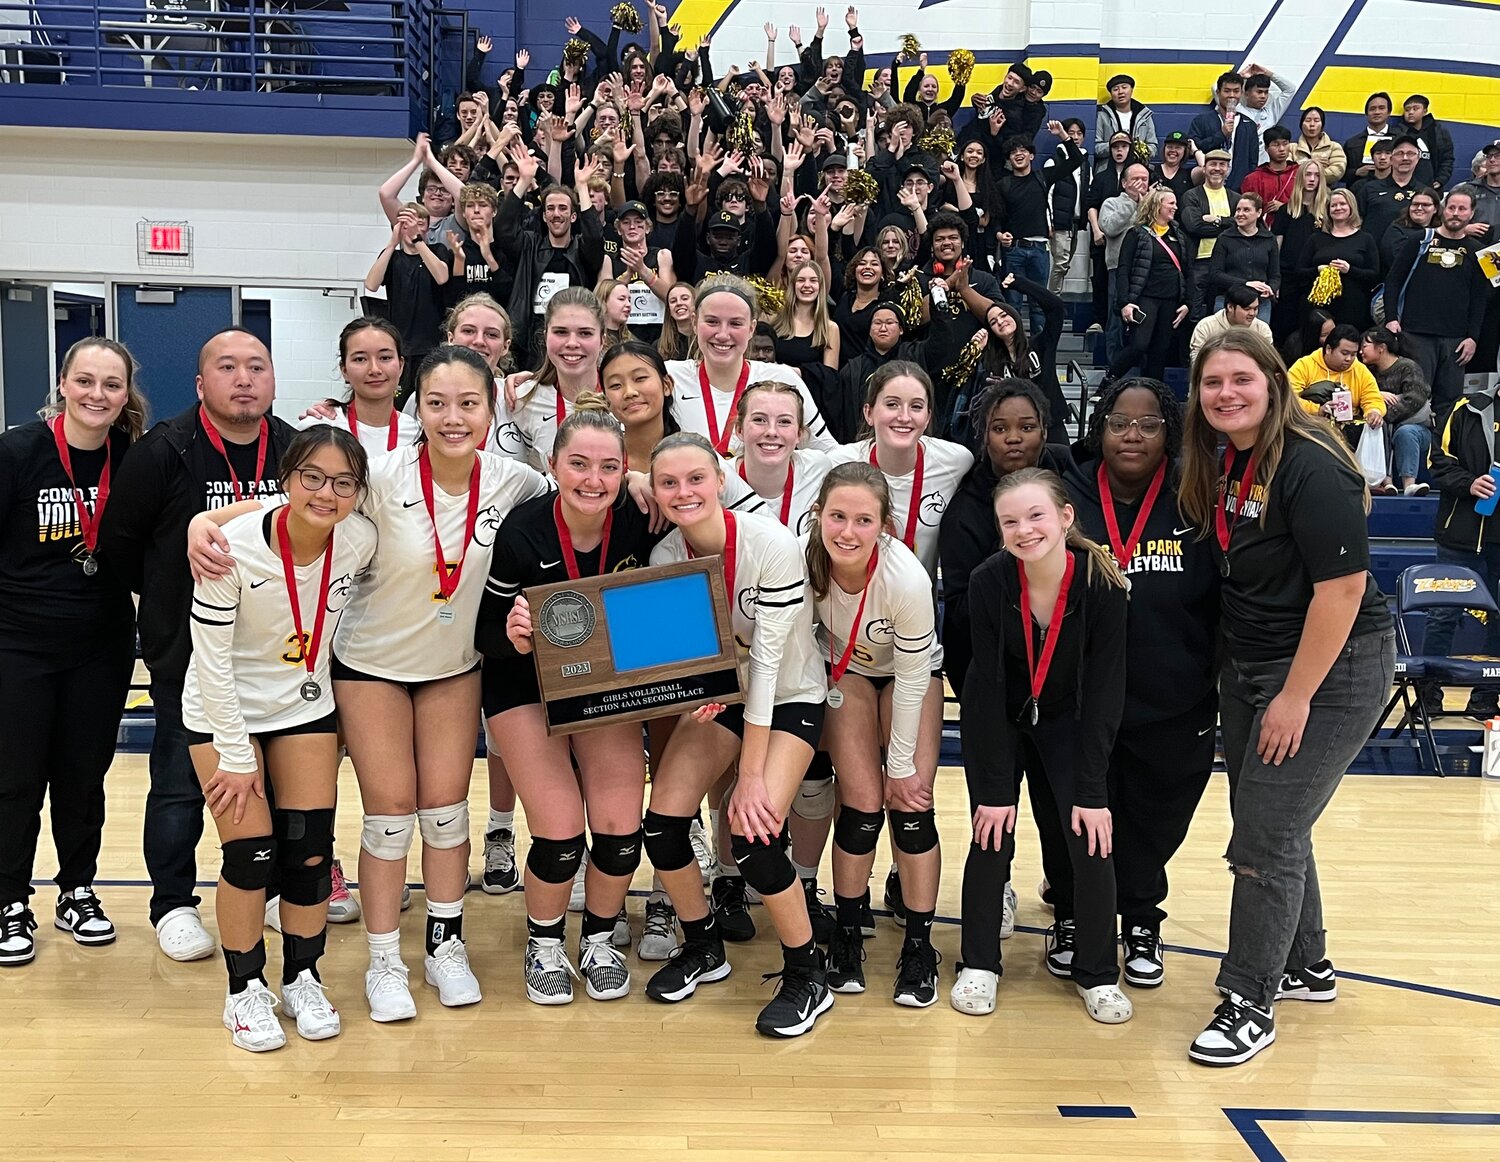 The Como volleyball reached the Section 4AAA Championship. The team is pictured with their second place trophy in front of their loyal supporters.